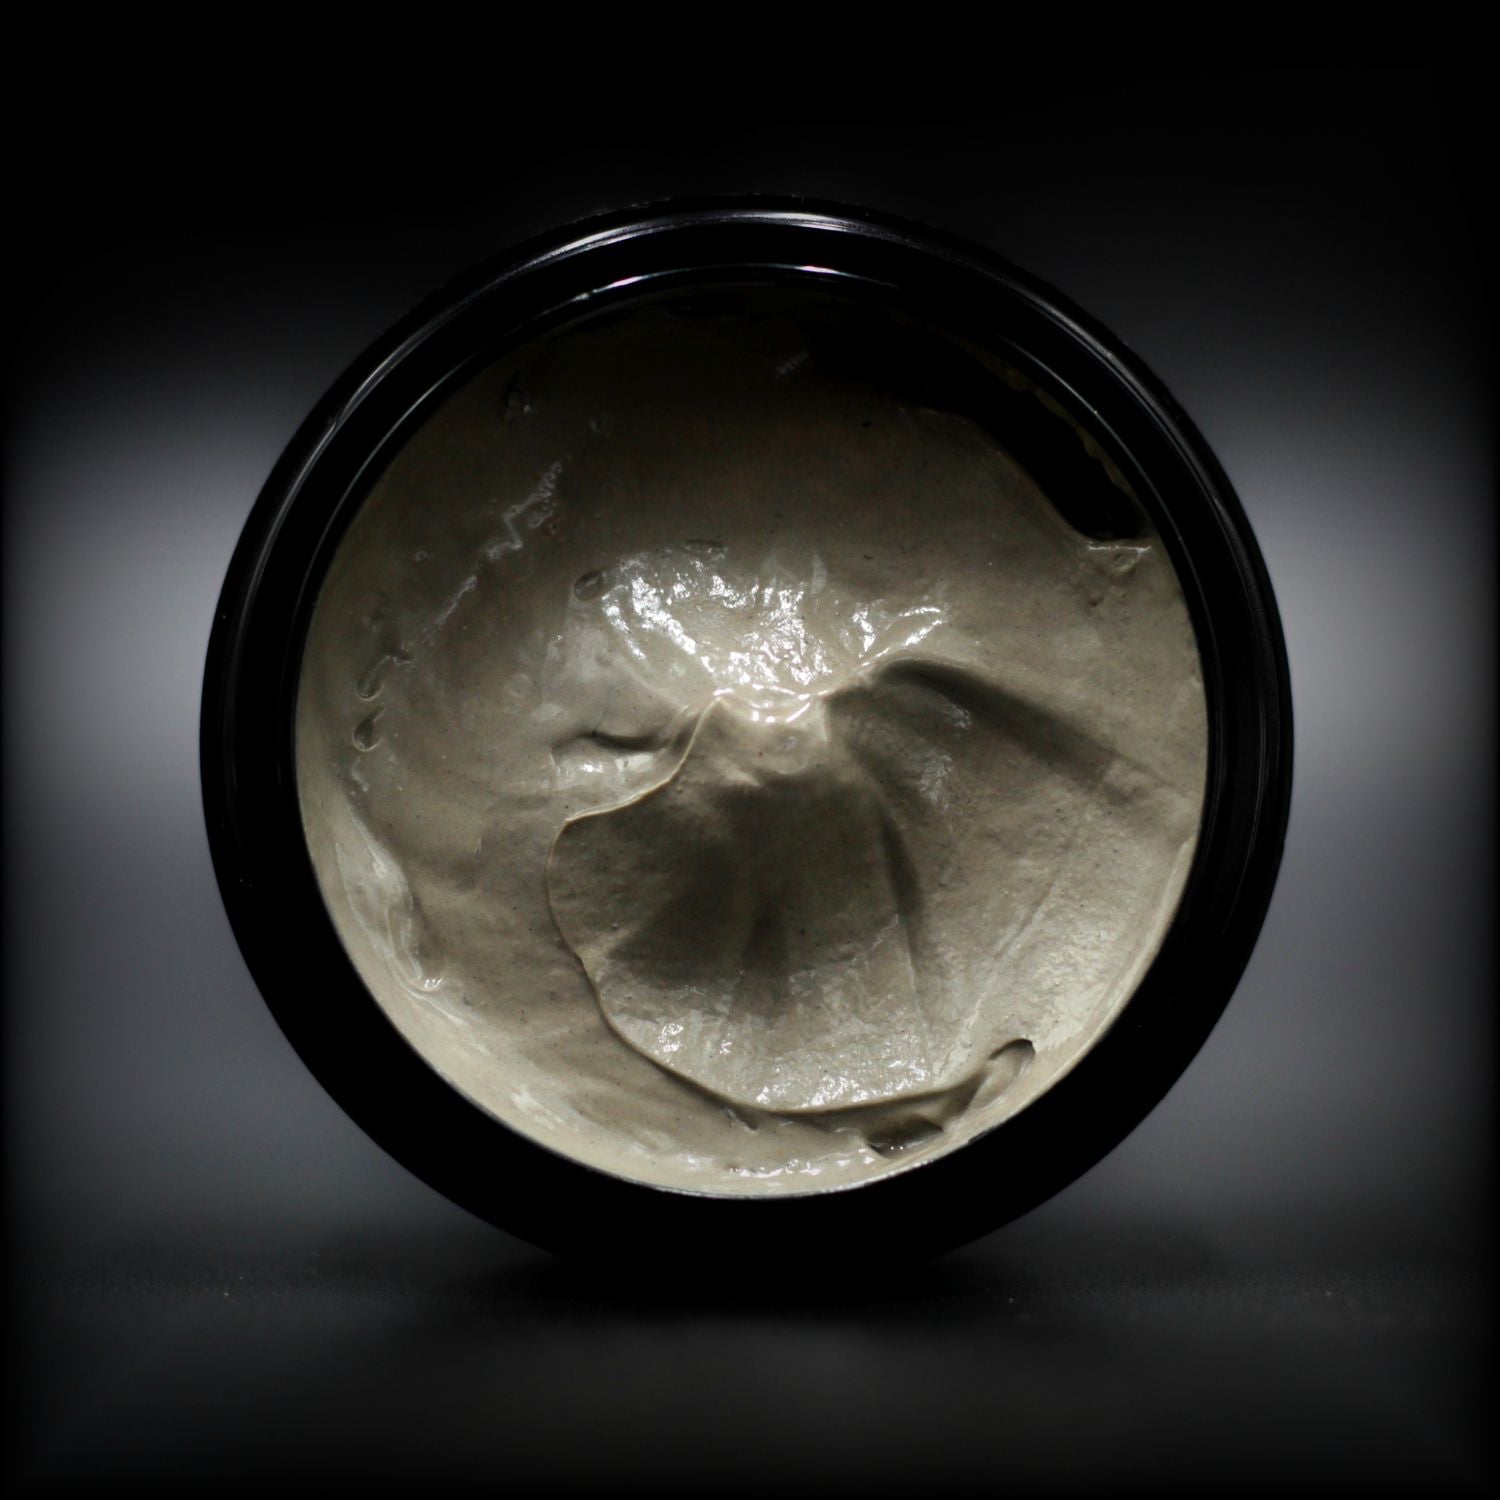 Naturally Wicked Hibiscus, Vanilla & Dead Sea Mud Firming Facial Mask Escaping Lid Of Black Container